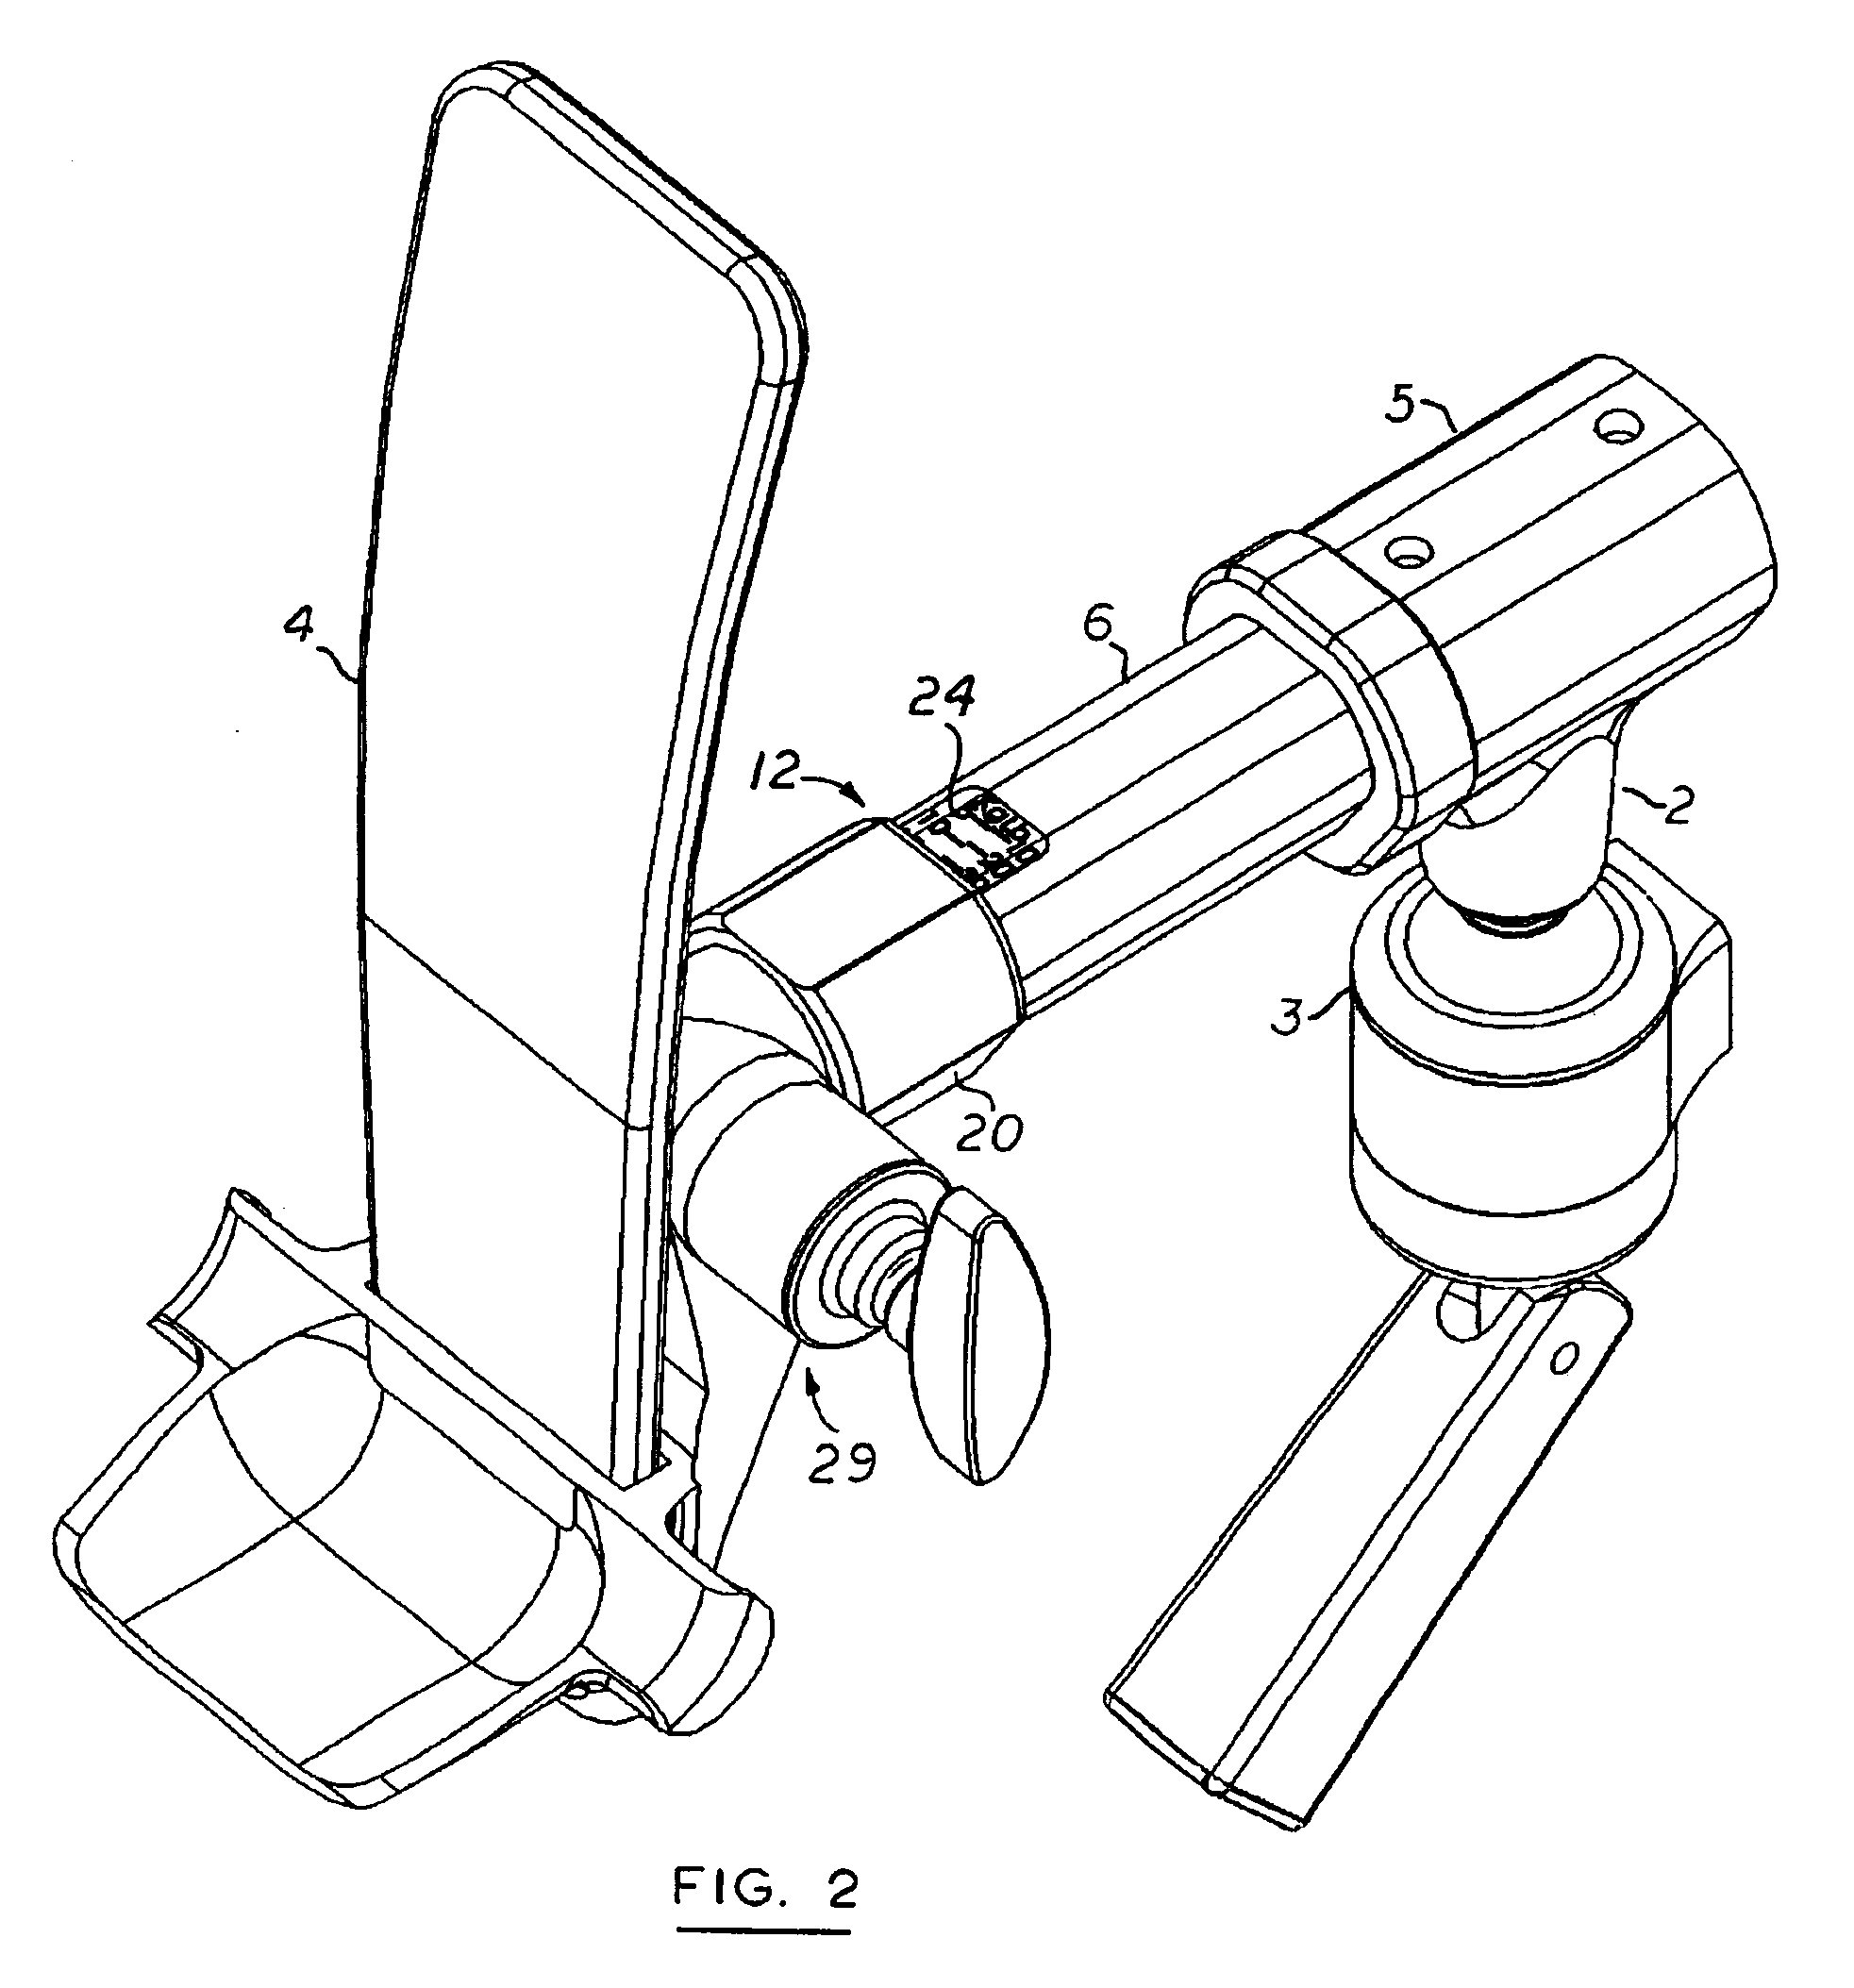 Orthopedic traction device